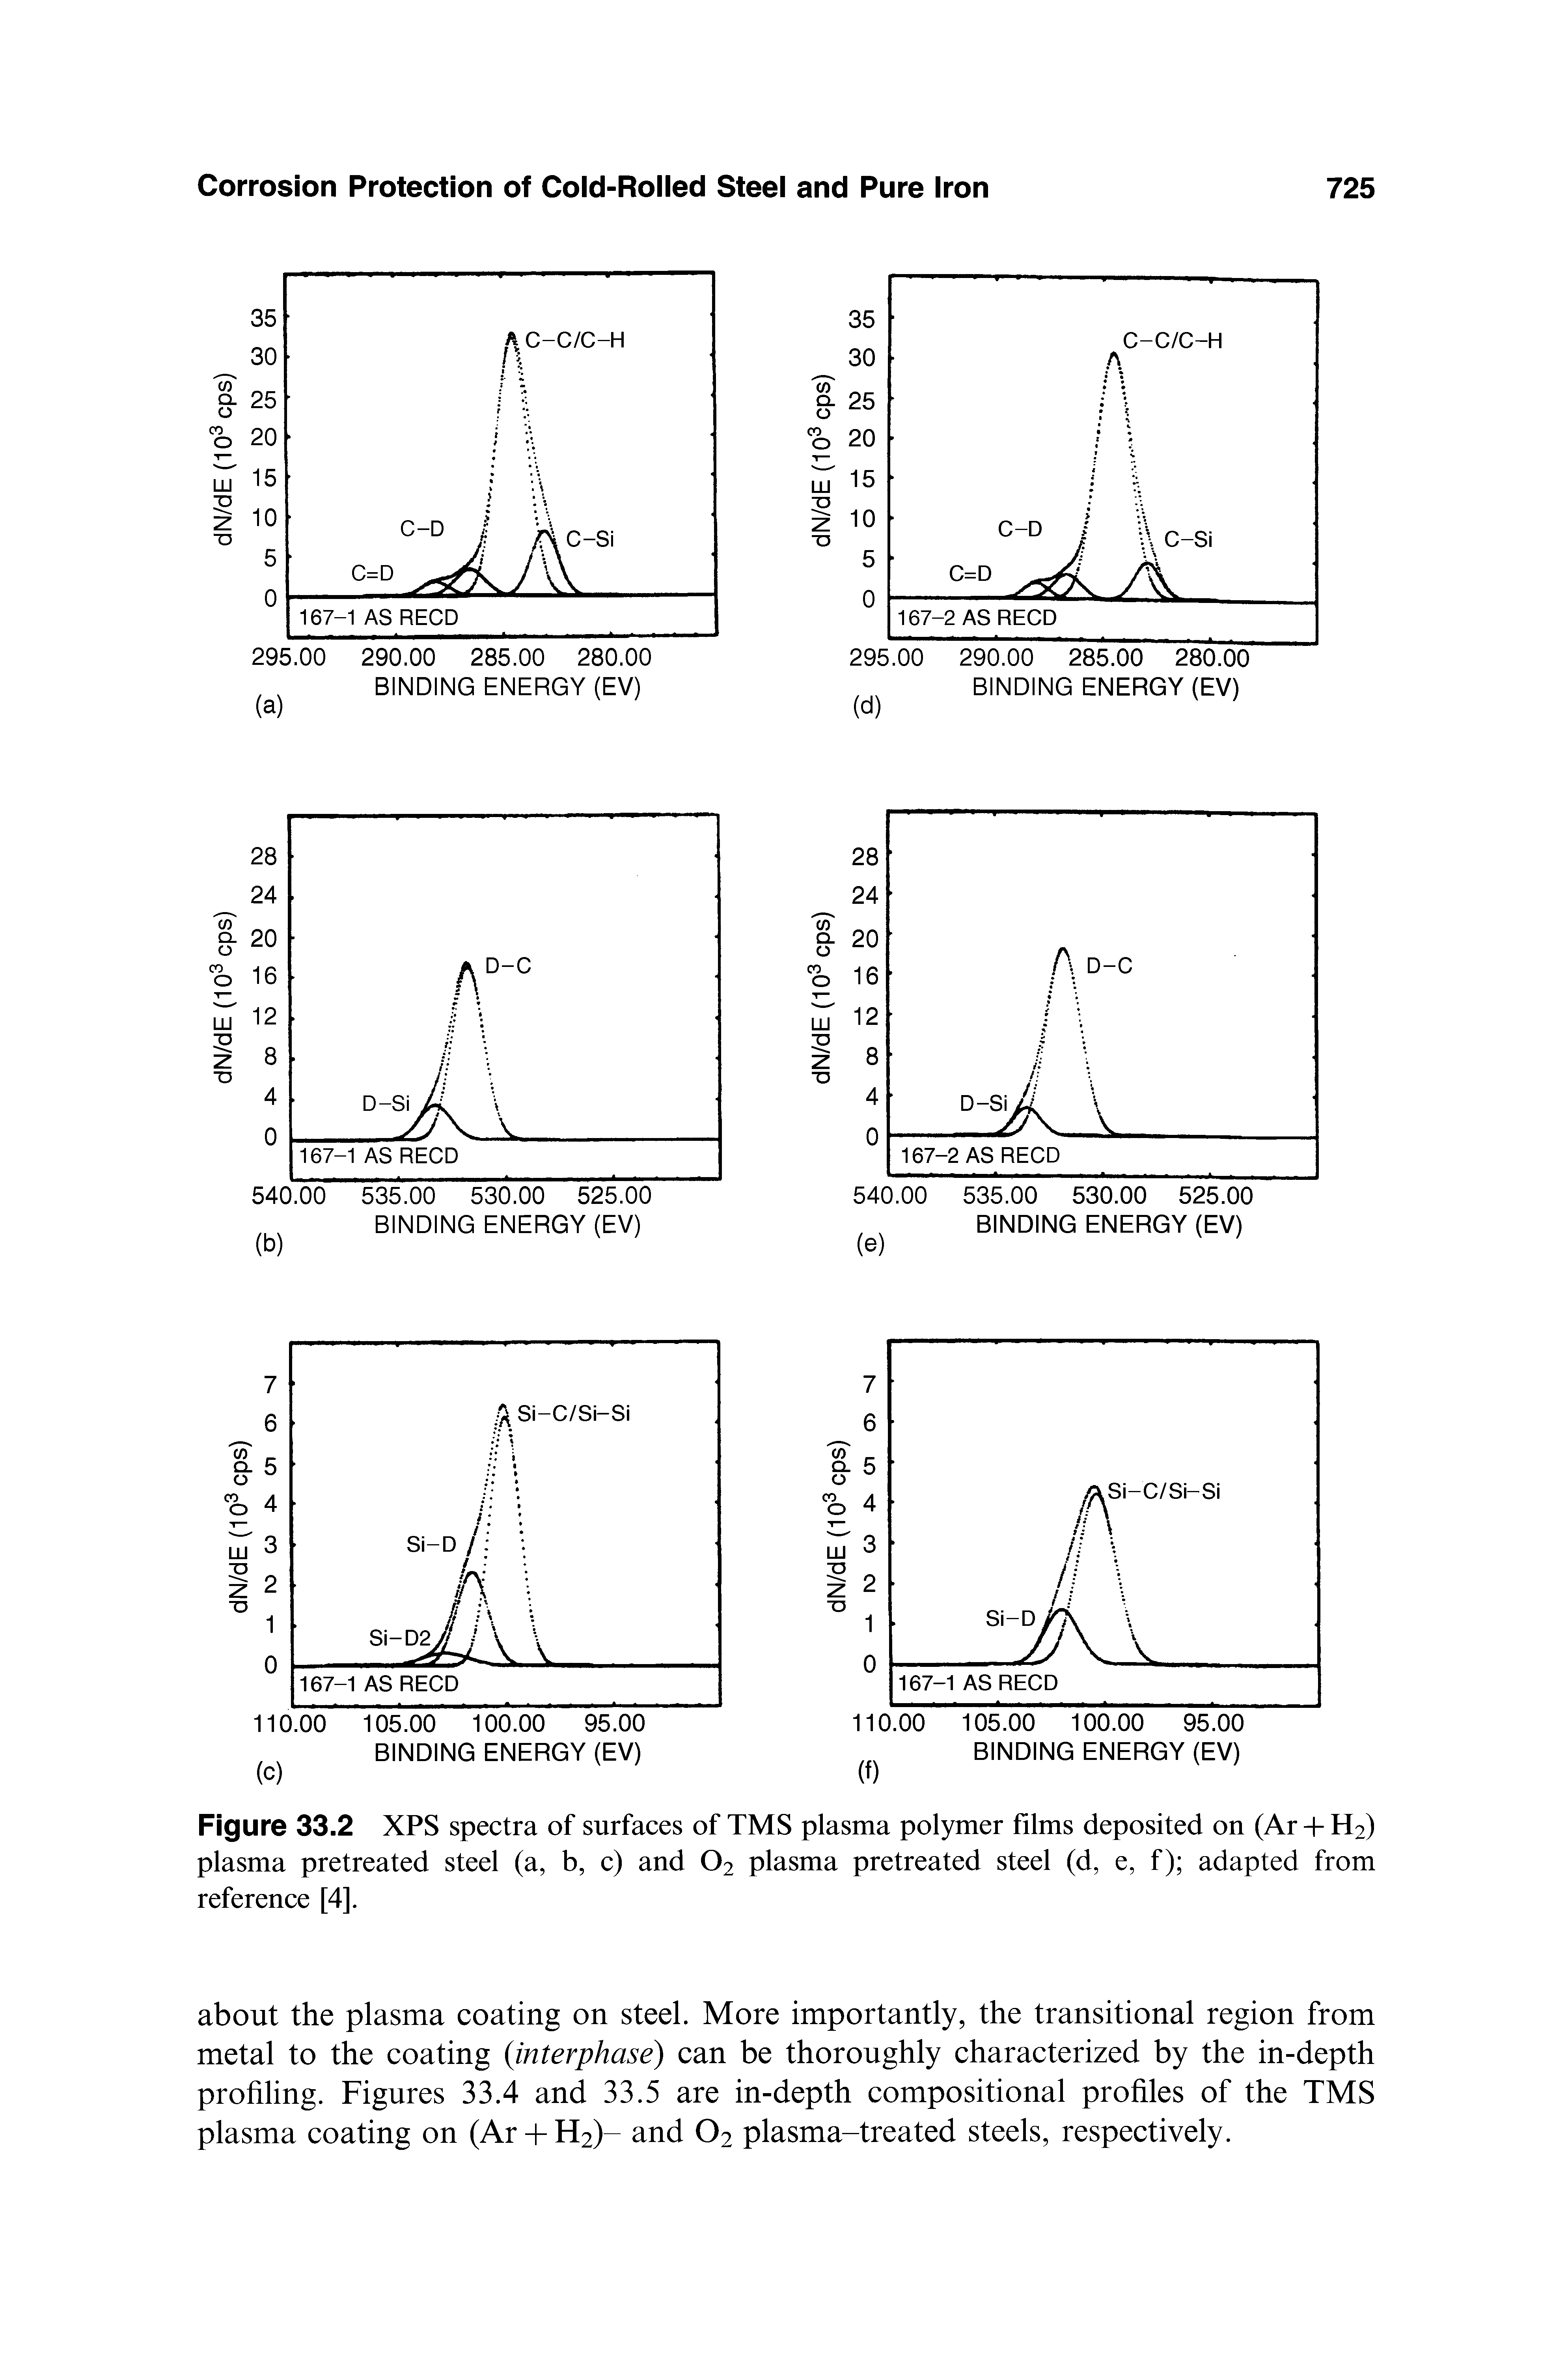 Figure 33.2 XPS spectra of surfaces of TMS plasma polymer films deposited on (Ar + H2) plasma pretreated steel (a, b, c) and O2 plasma pretreated steel (d, e, f) adapted from reference [4].